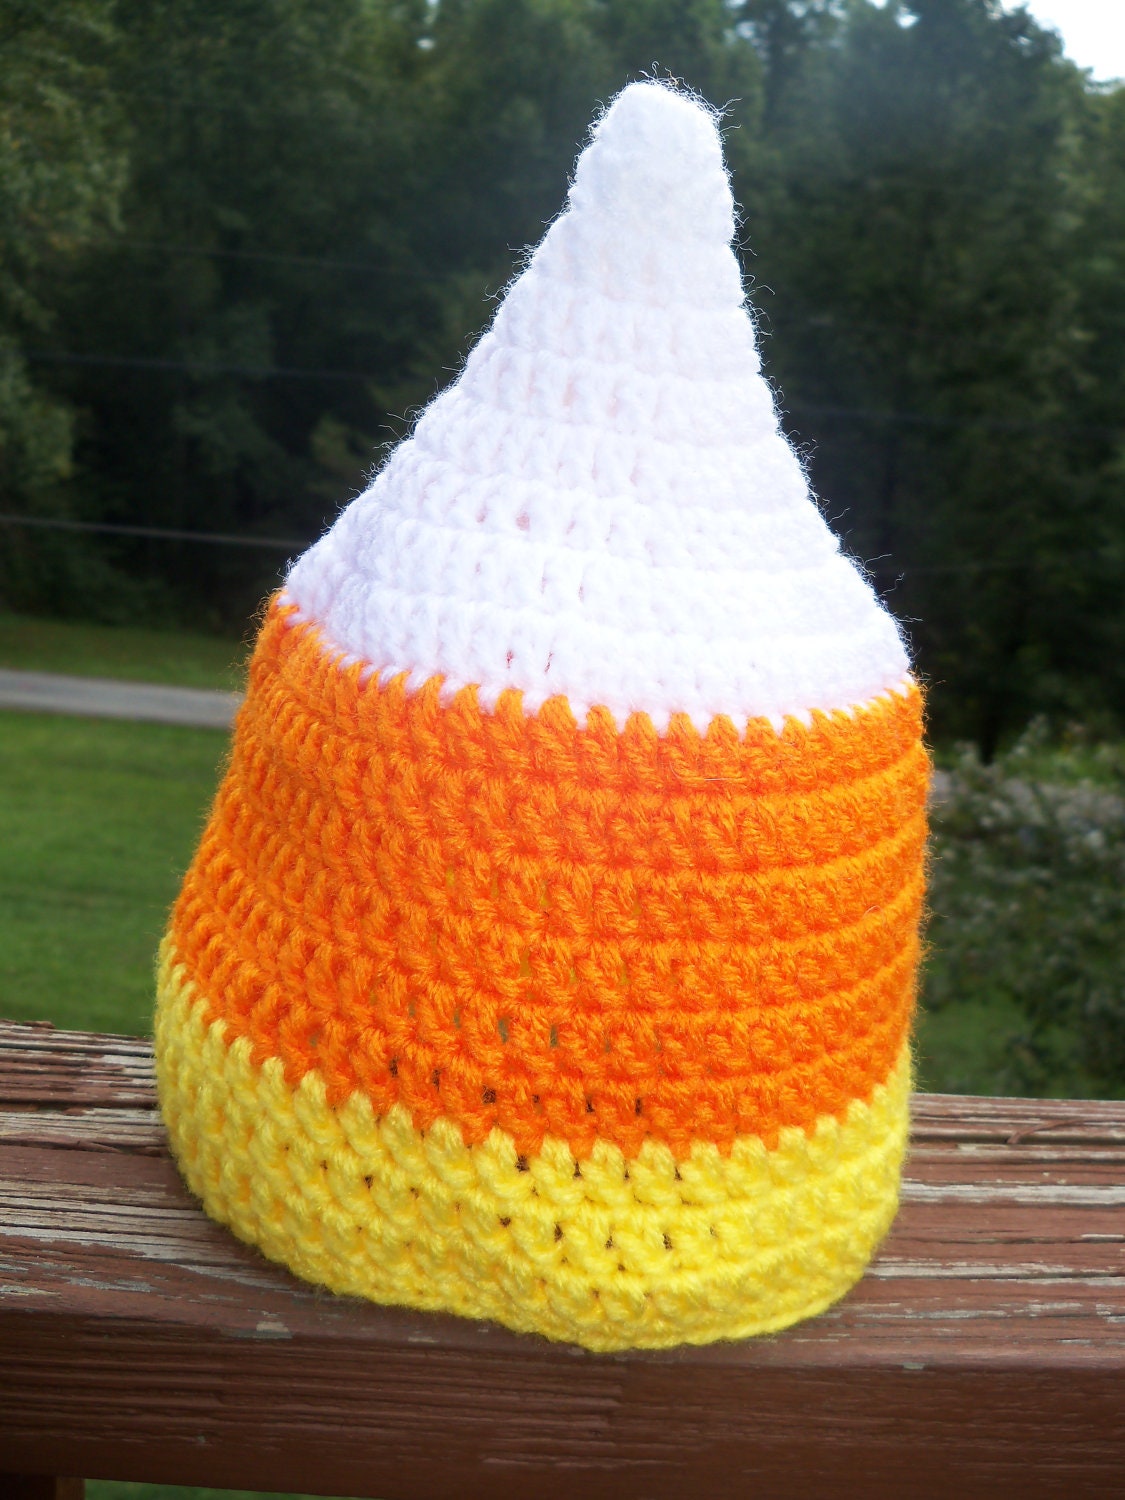 Crocheted Candy Corn Baby Hat: Size 6 Months